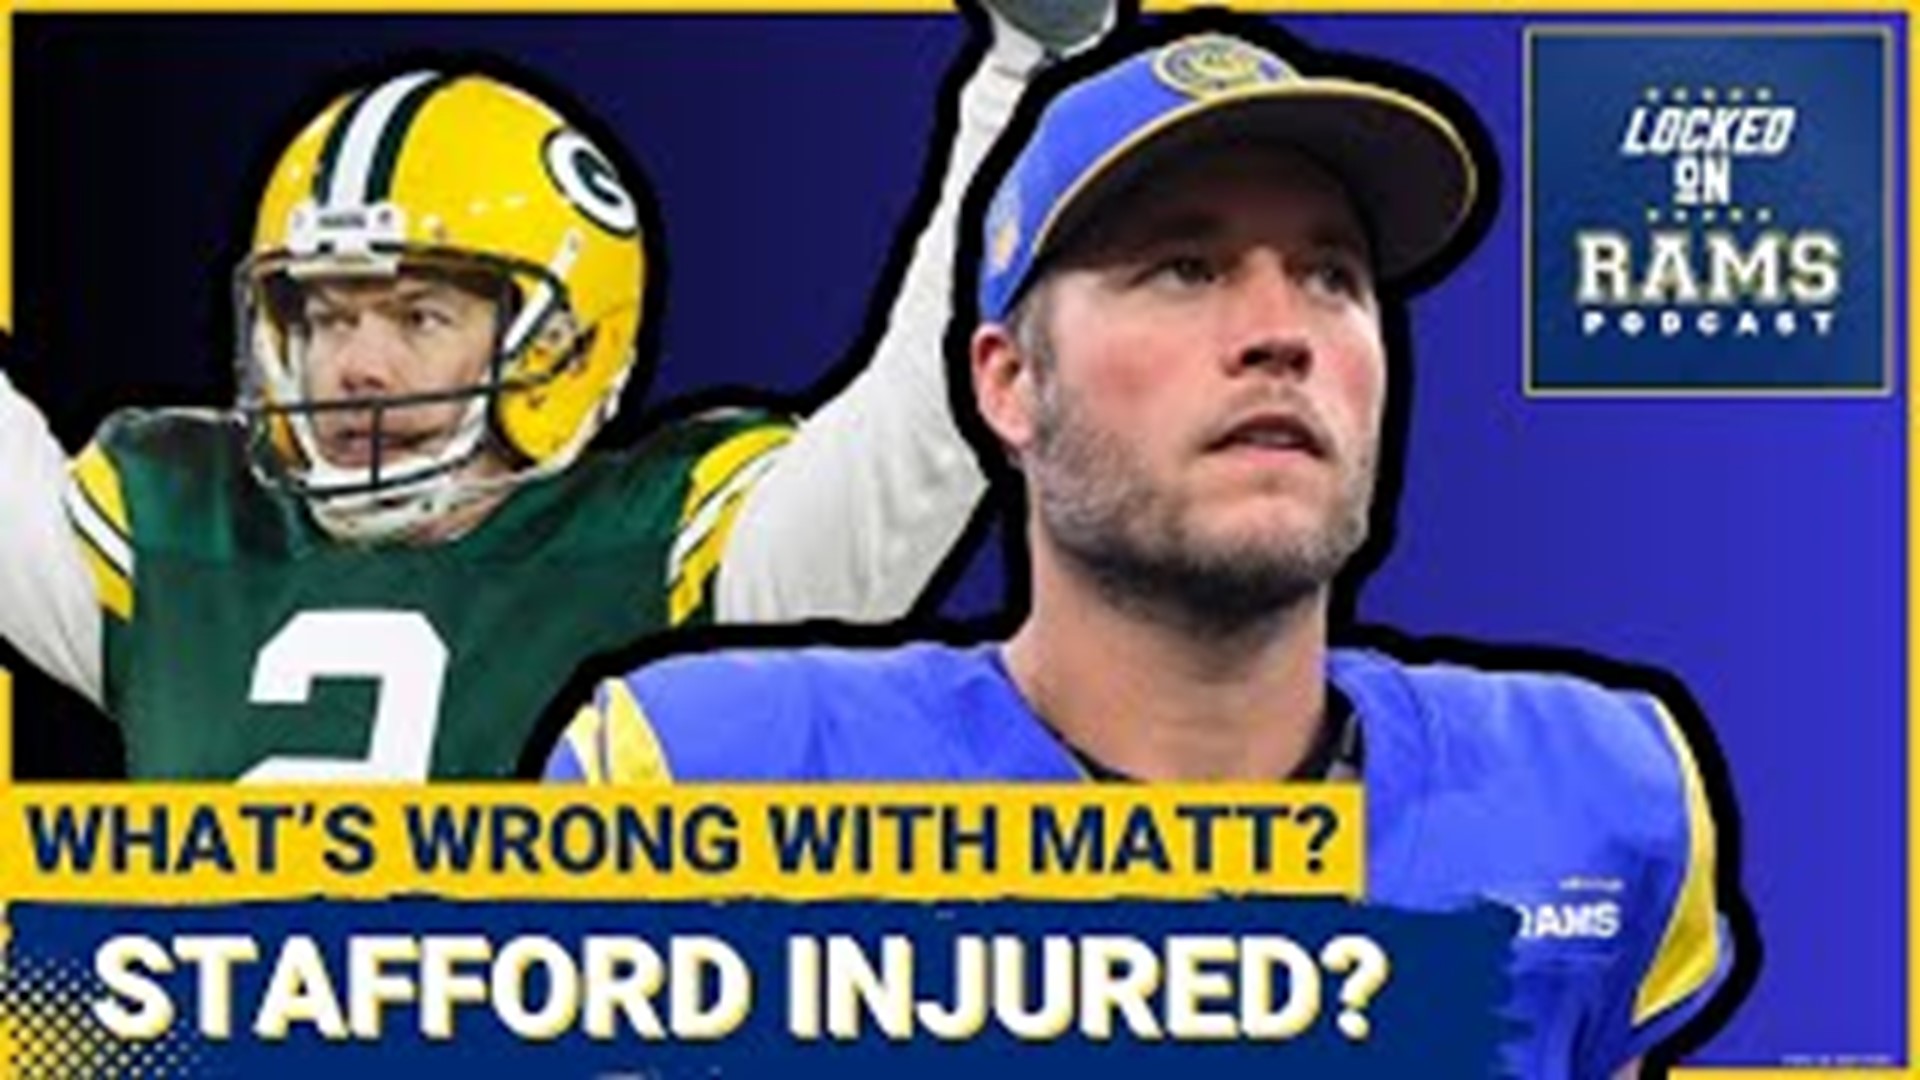 Matthew Stafford's wife, Kelly Stafford mentioned on her podcast that that the Pro Bowl quarterback is playing through pain.